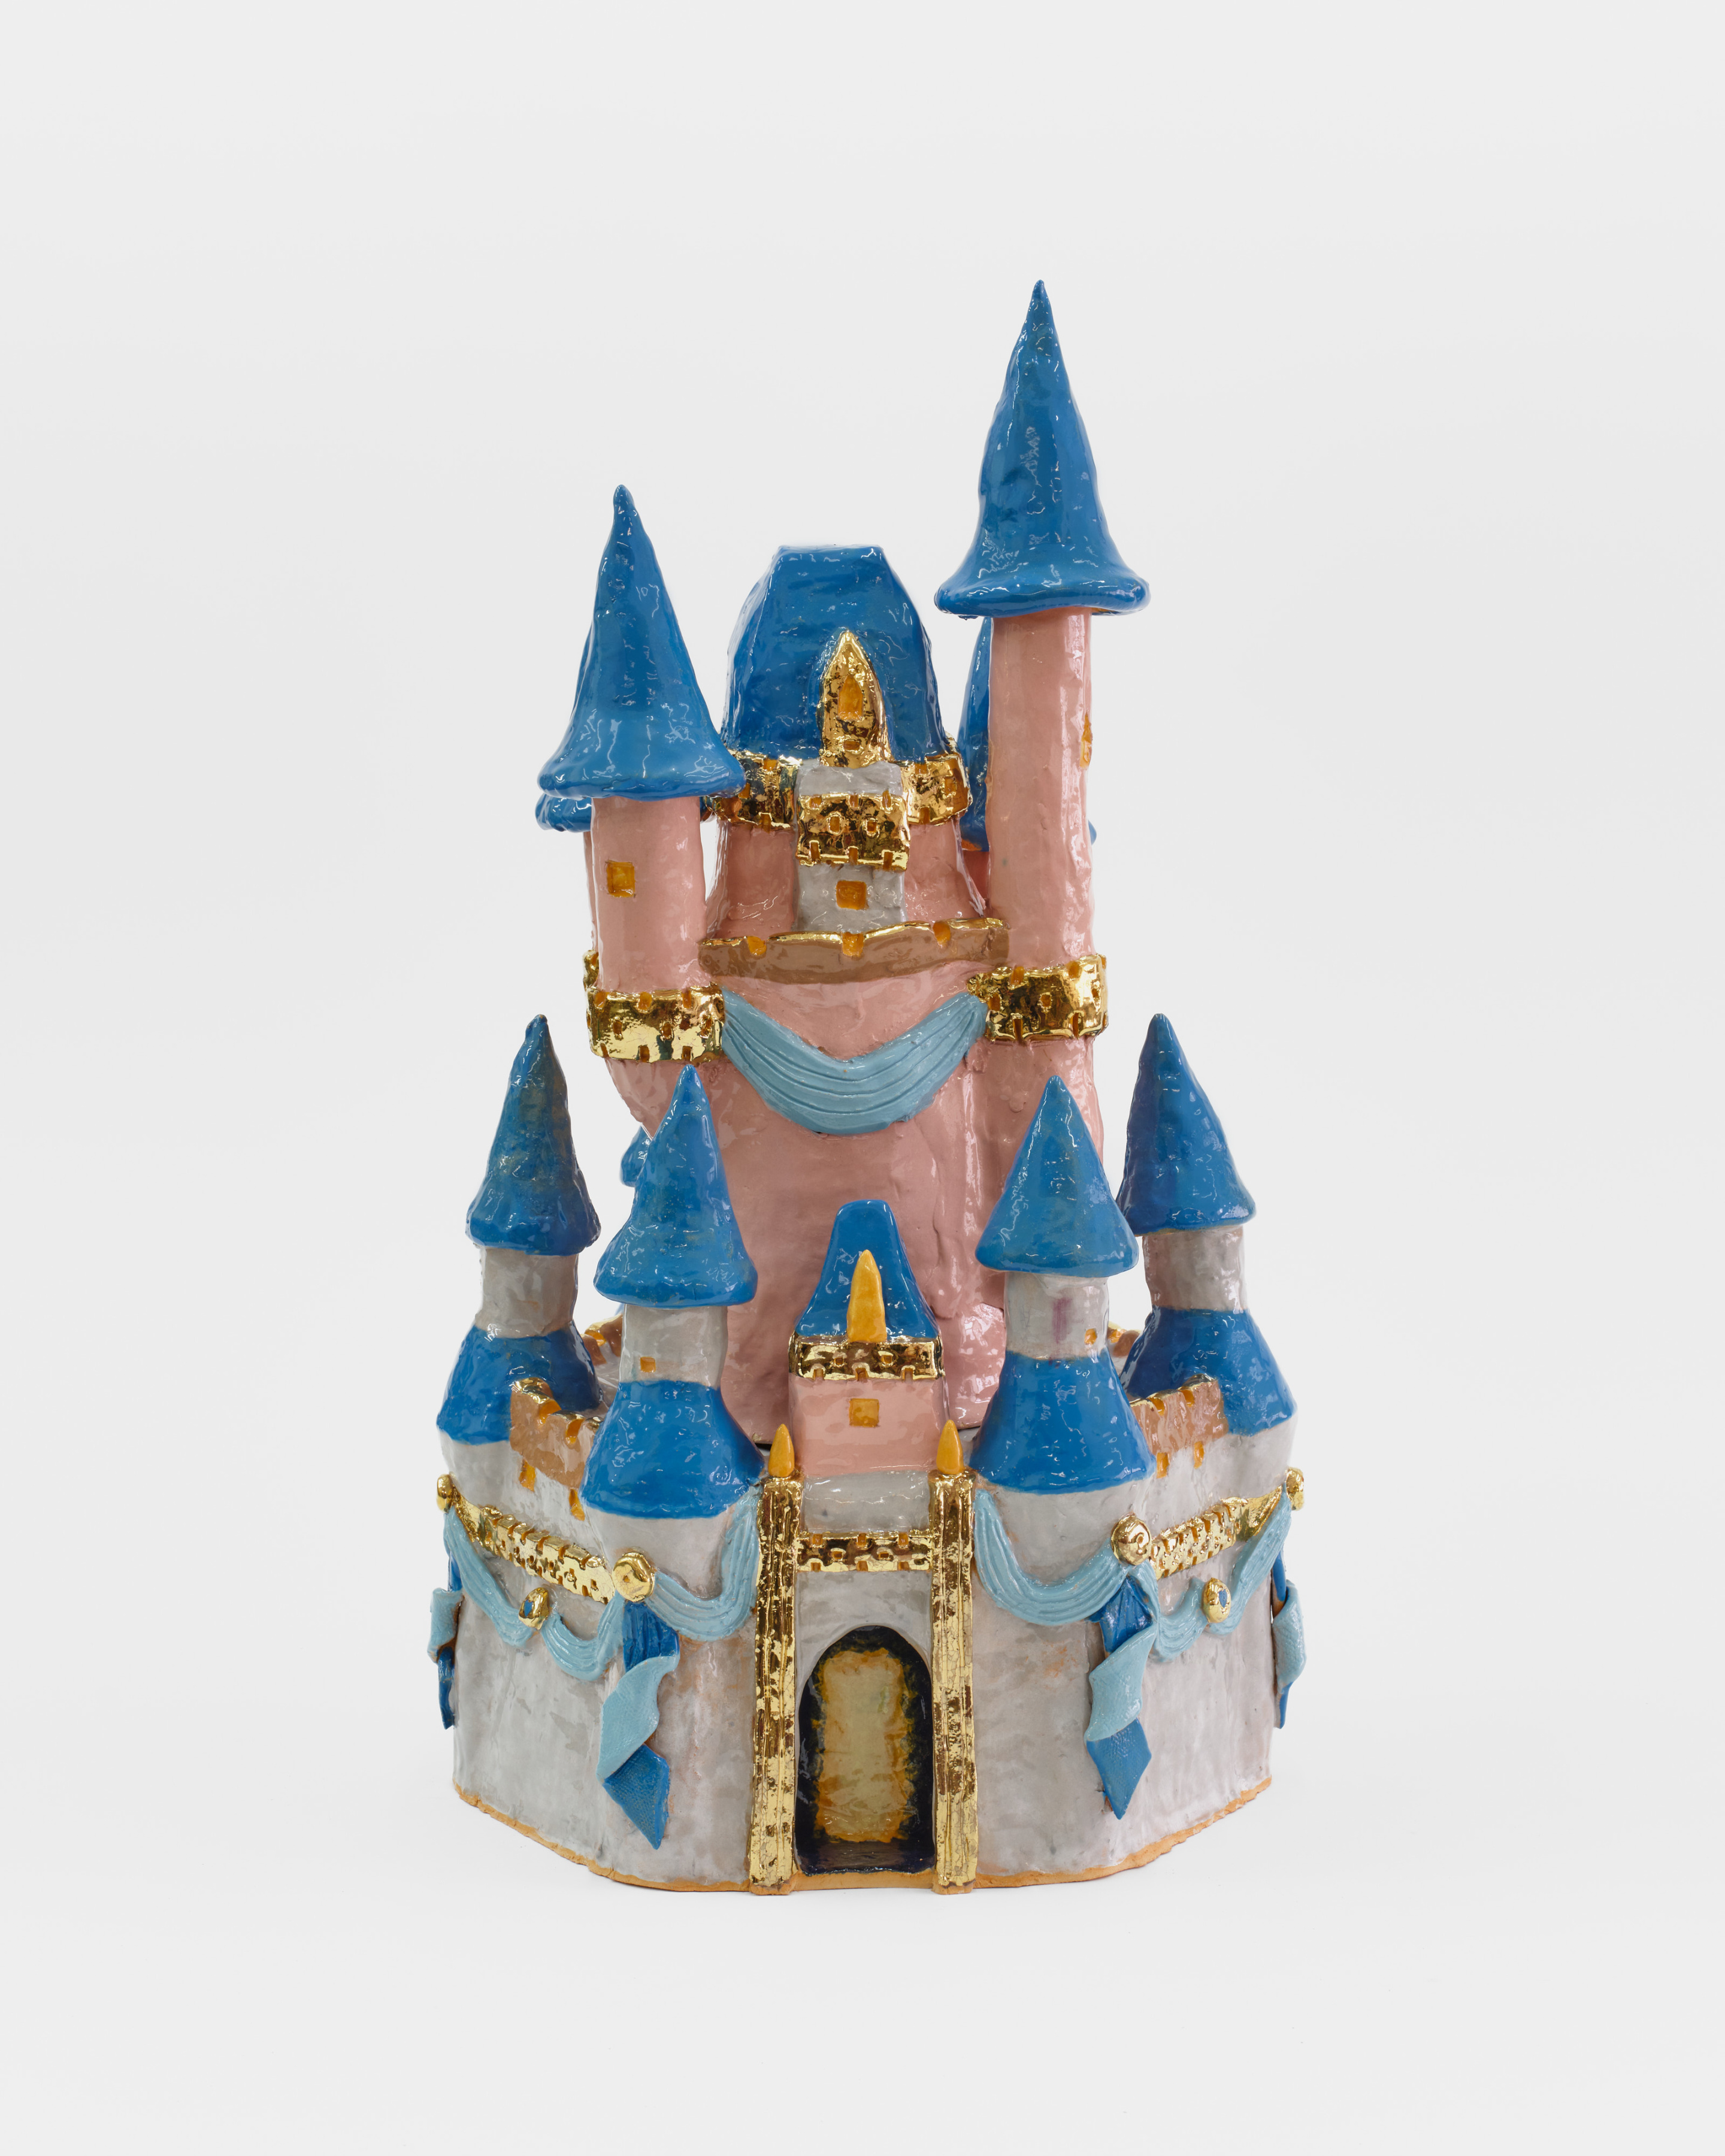 A ceramic sculpture of a Disney like pink castle with blue tipped turrets, ribbons and golden features. 